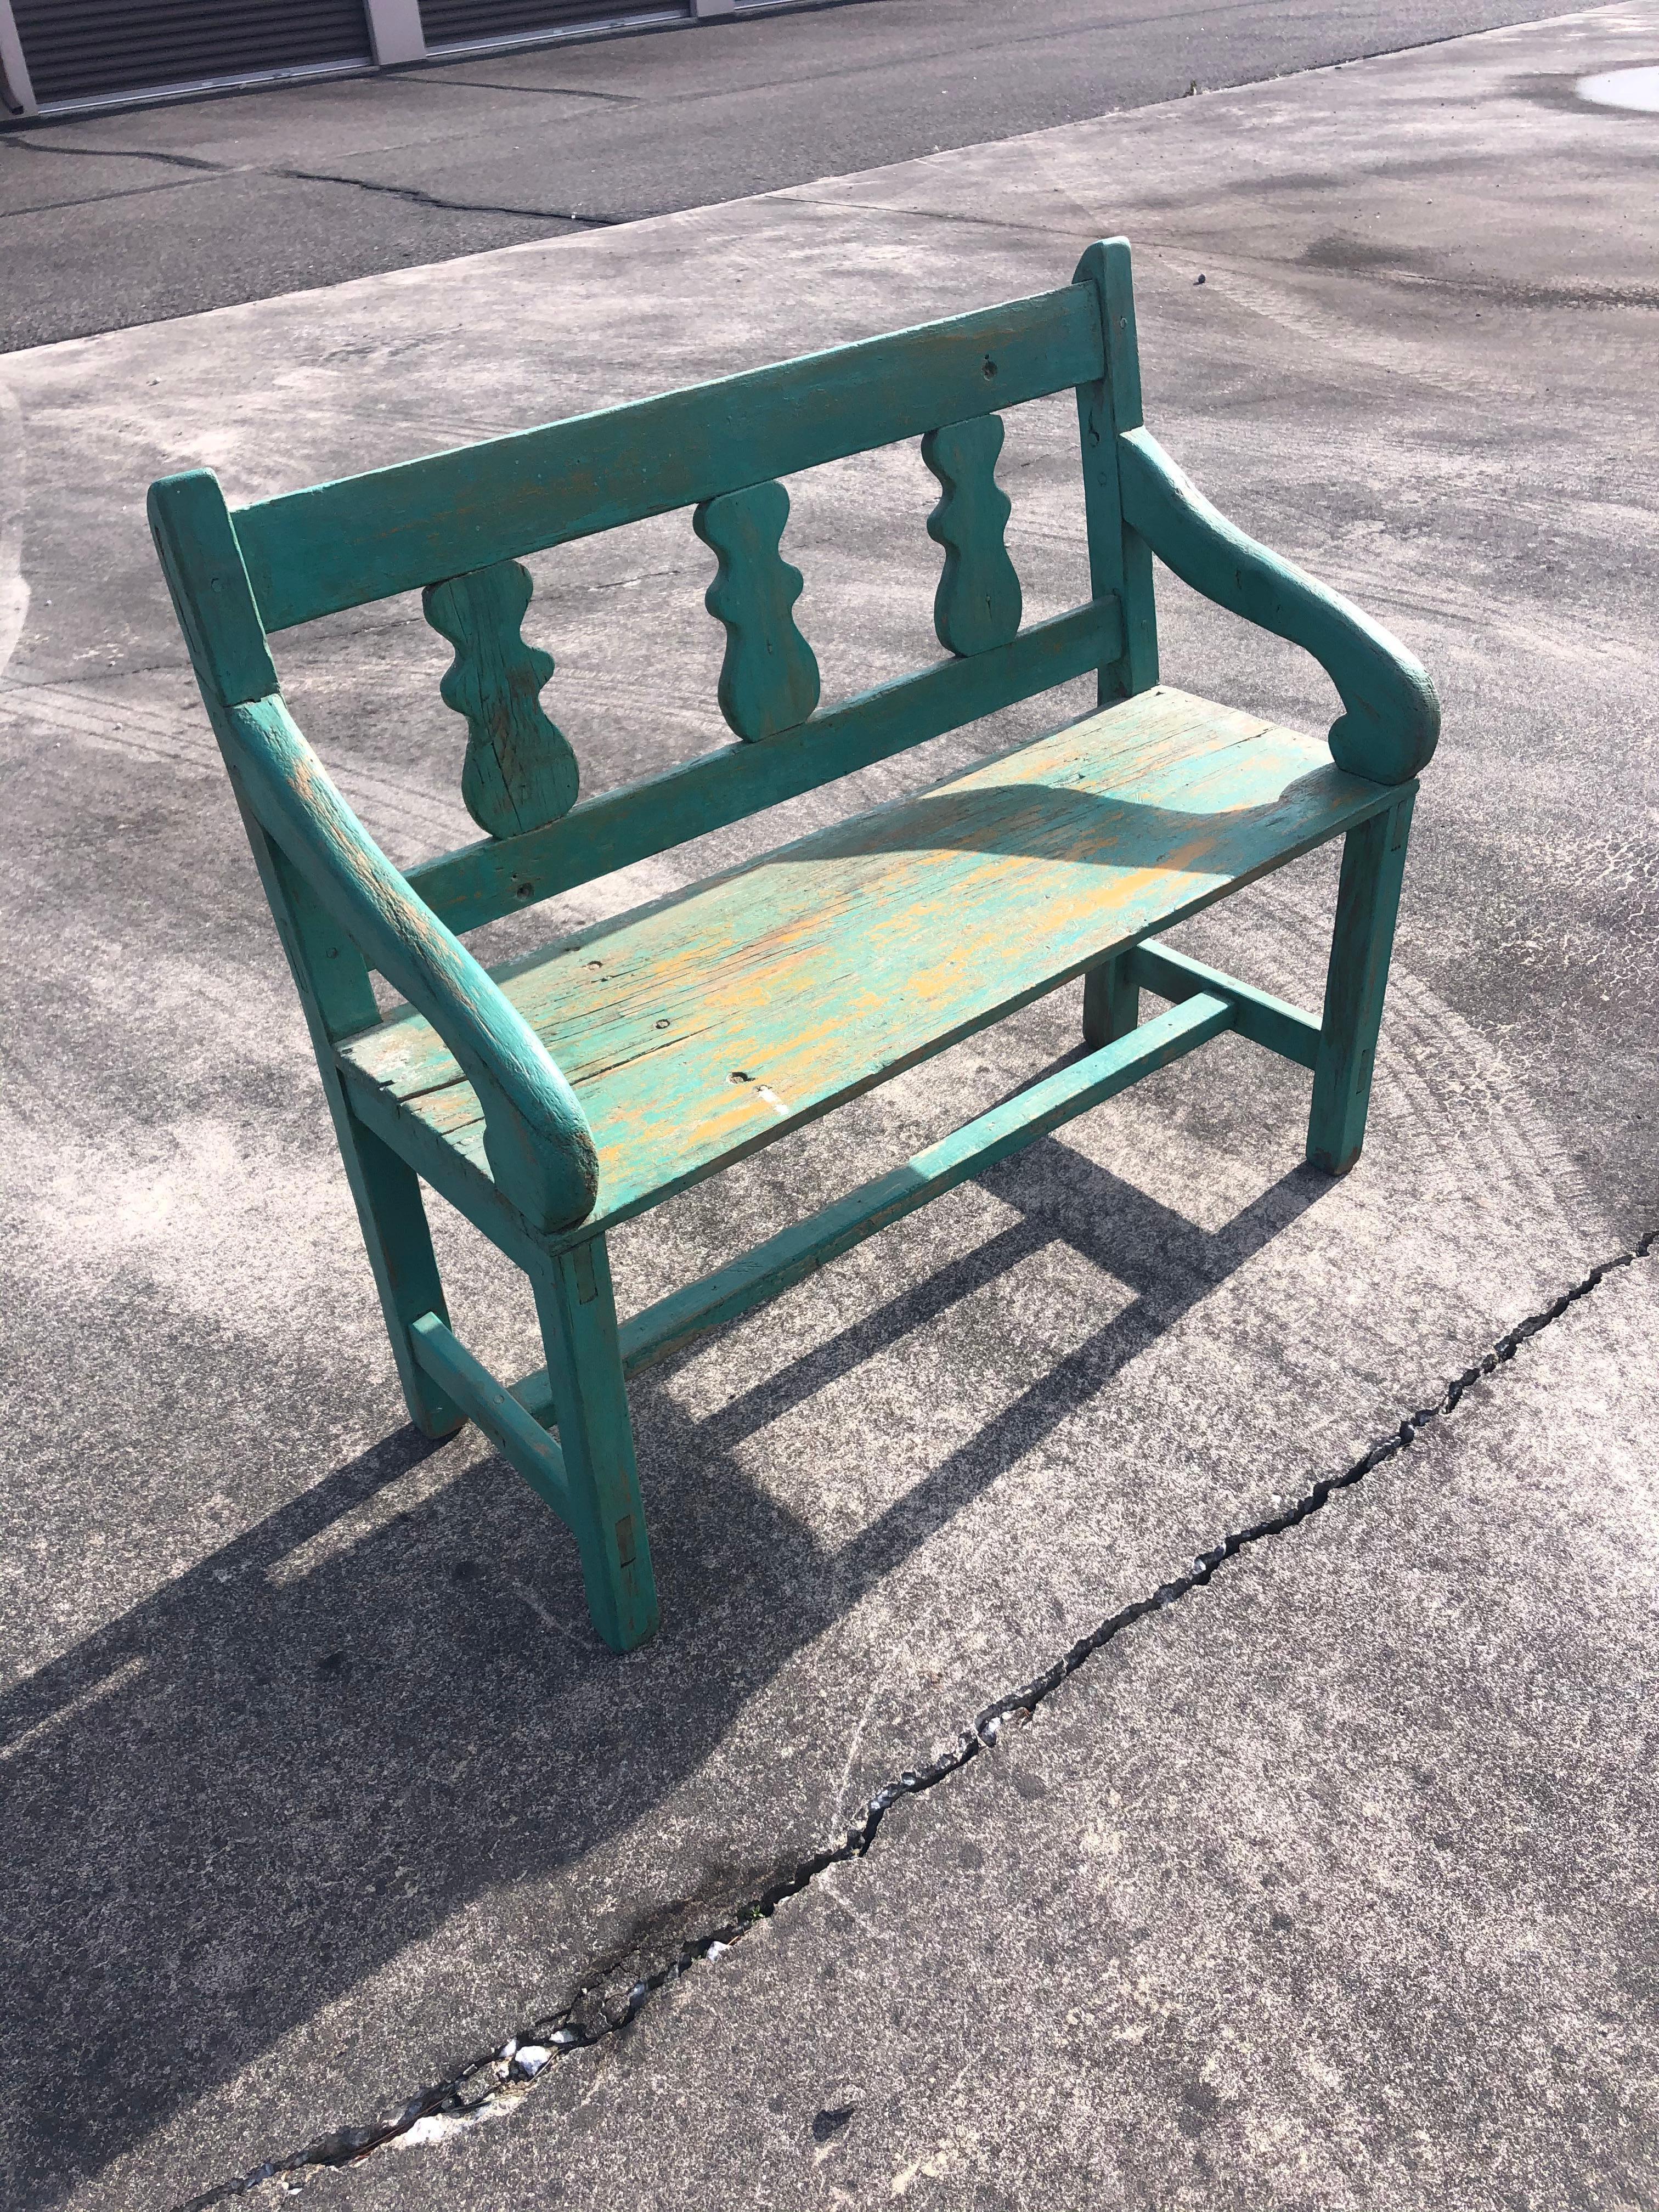 Wonderful old rustic Santa Fe bench having original weathered turquoise paint with yellow undercoat showing through.
Measures: Arm height 24.